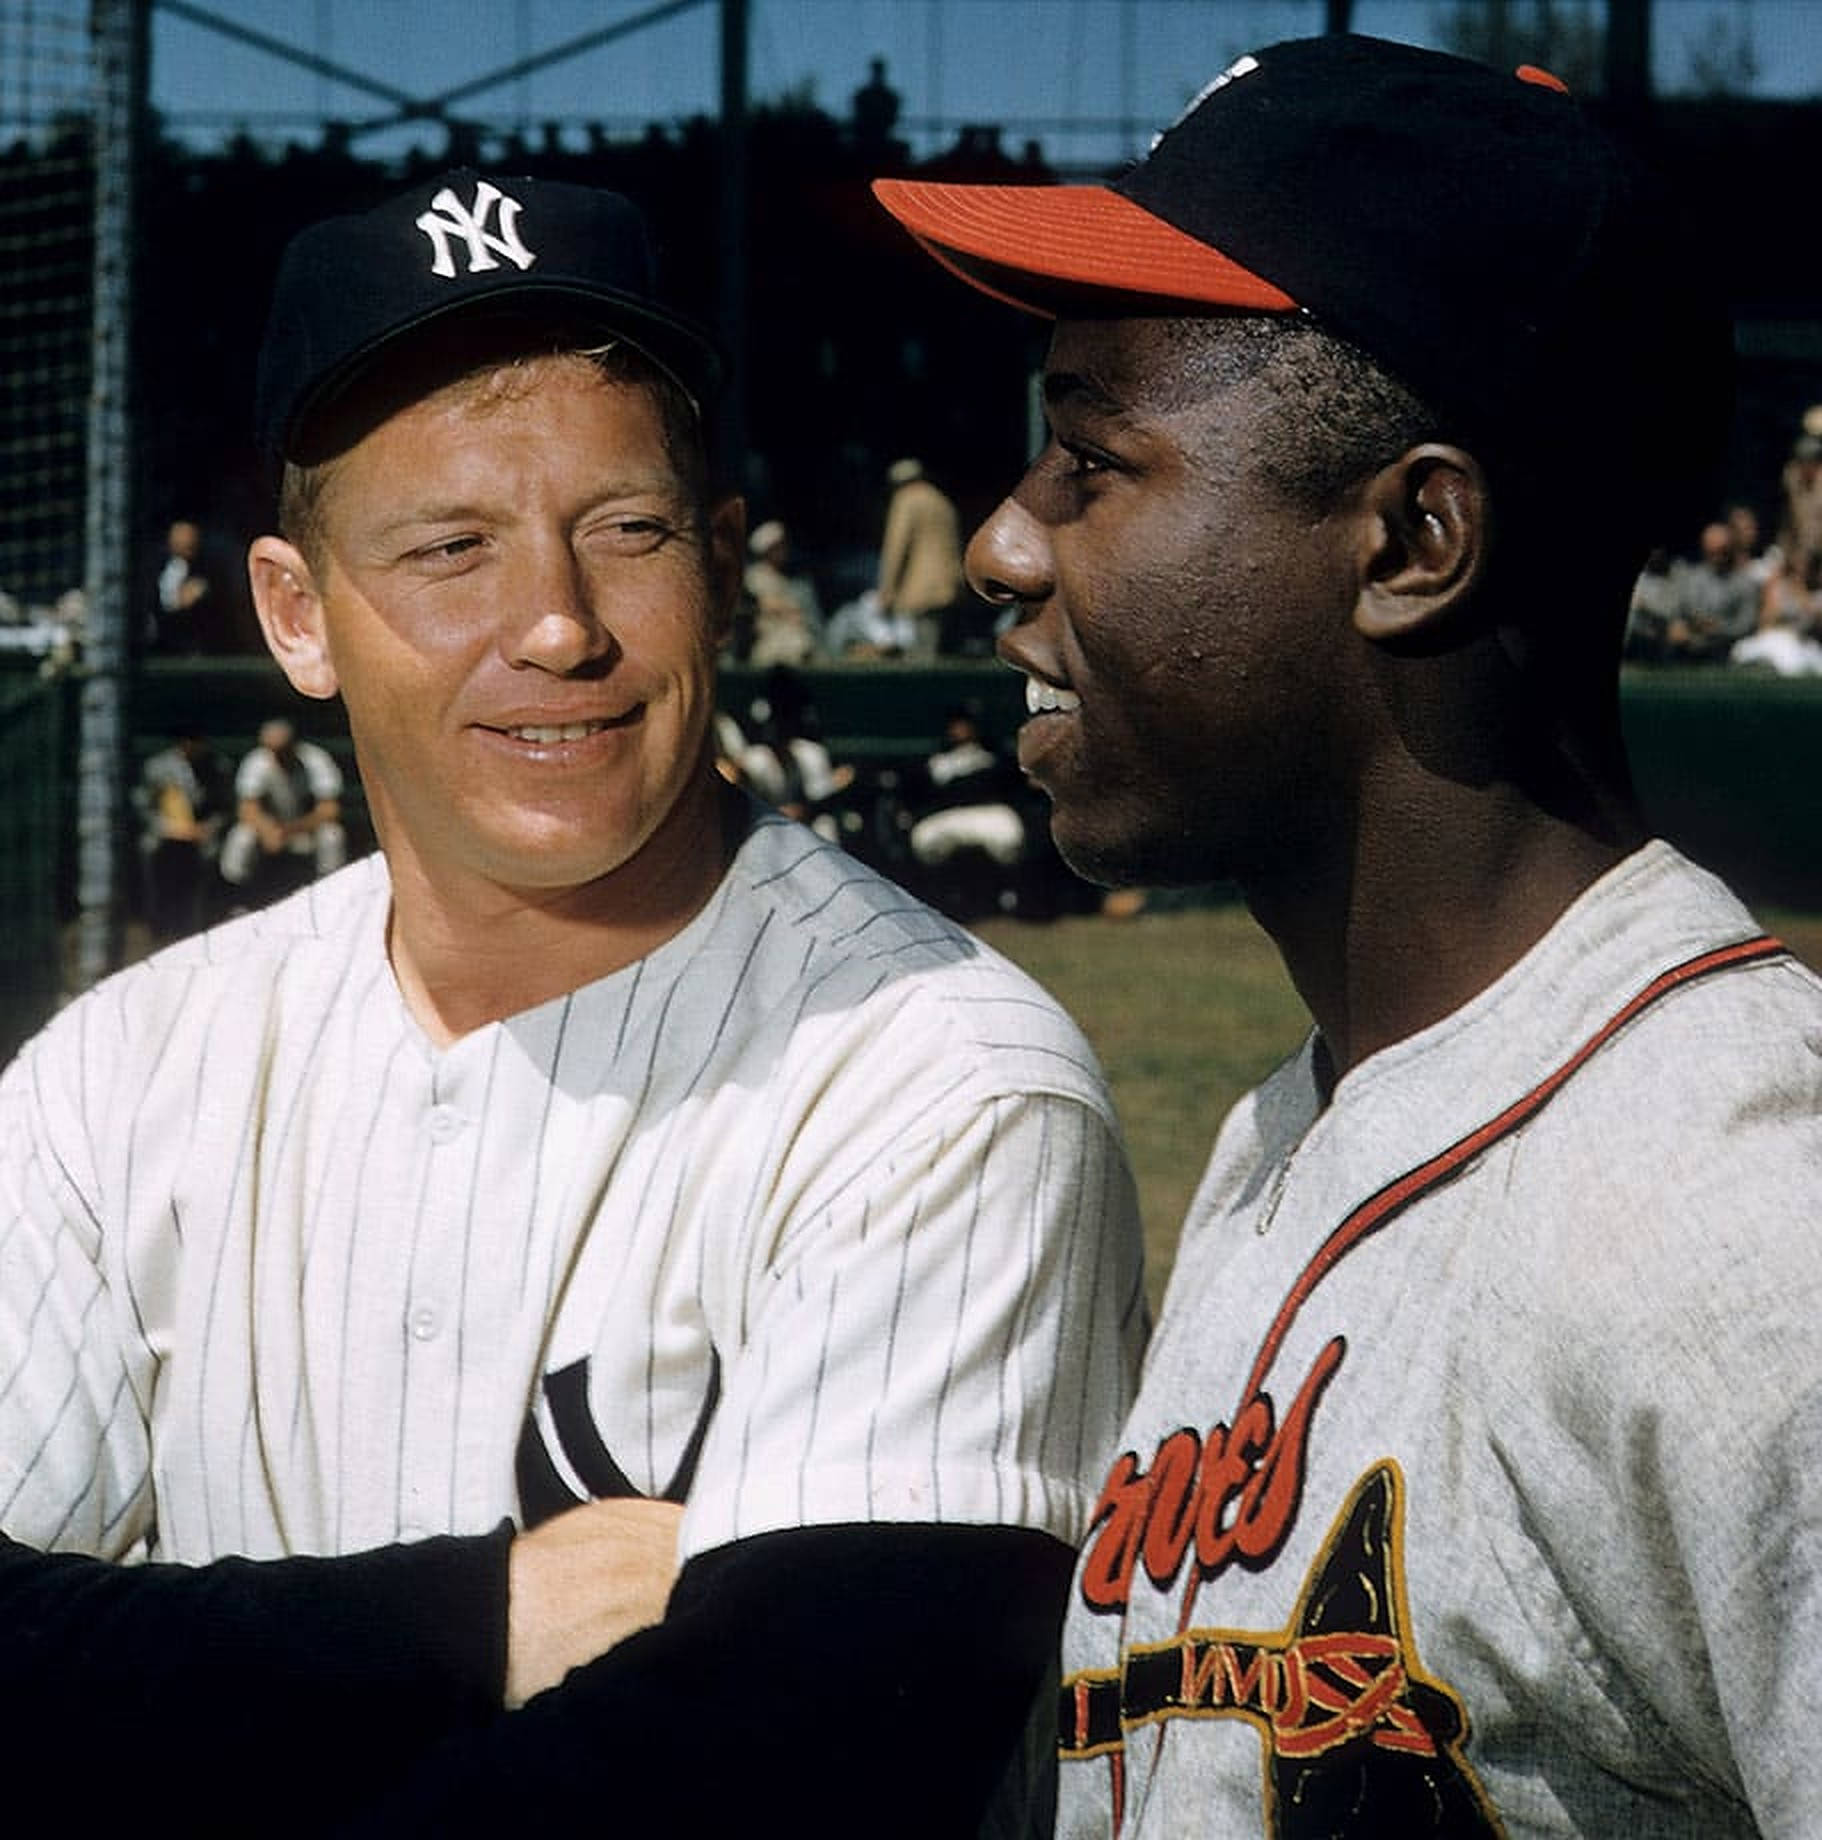 Hankaaron Med Mickey Mantle. (no Specific Context Related To Computer Or Mobile Wallpaper Provided.) Wallpaper